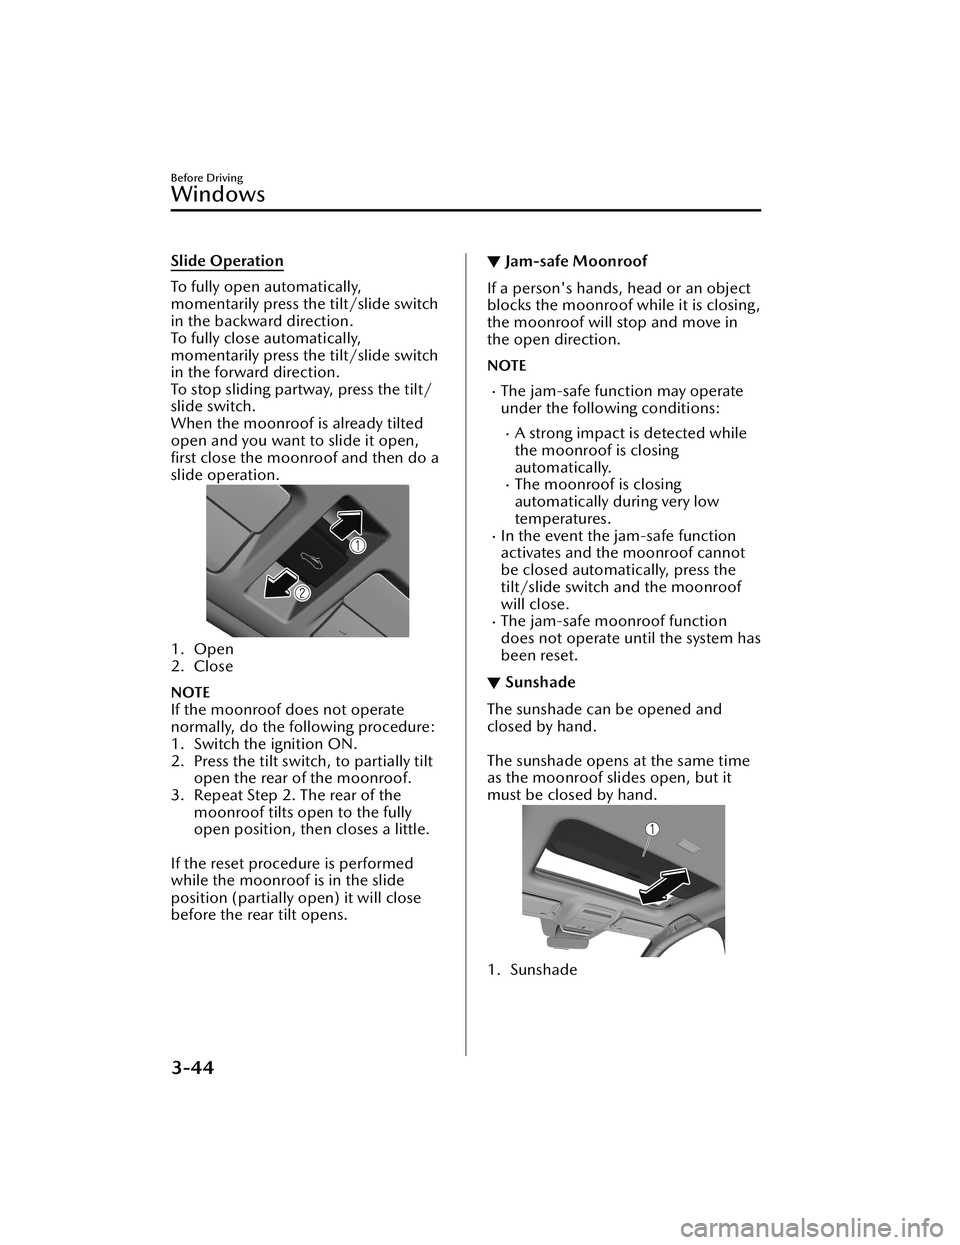 MAZDA MODEL CX-30 2021  Owners Manual Slide Operation
To fully open automatically,
momentarily press the tilt/slide switch
in the backward direction.
To fully close automatically,
momentarily press the tilt/slide switch
in the forward dir